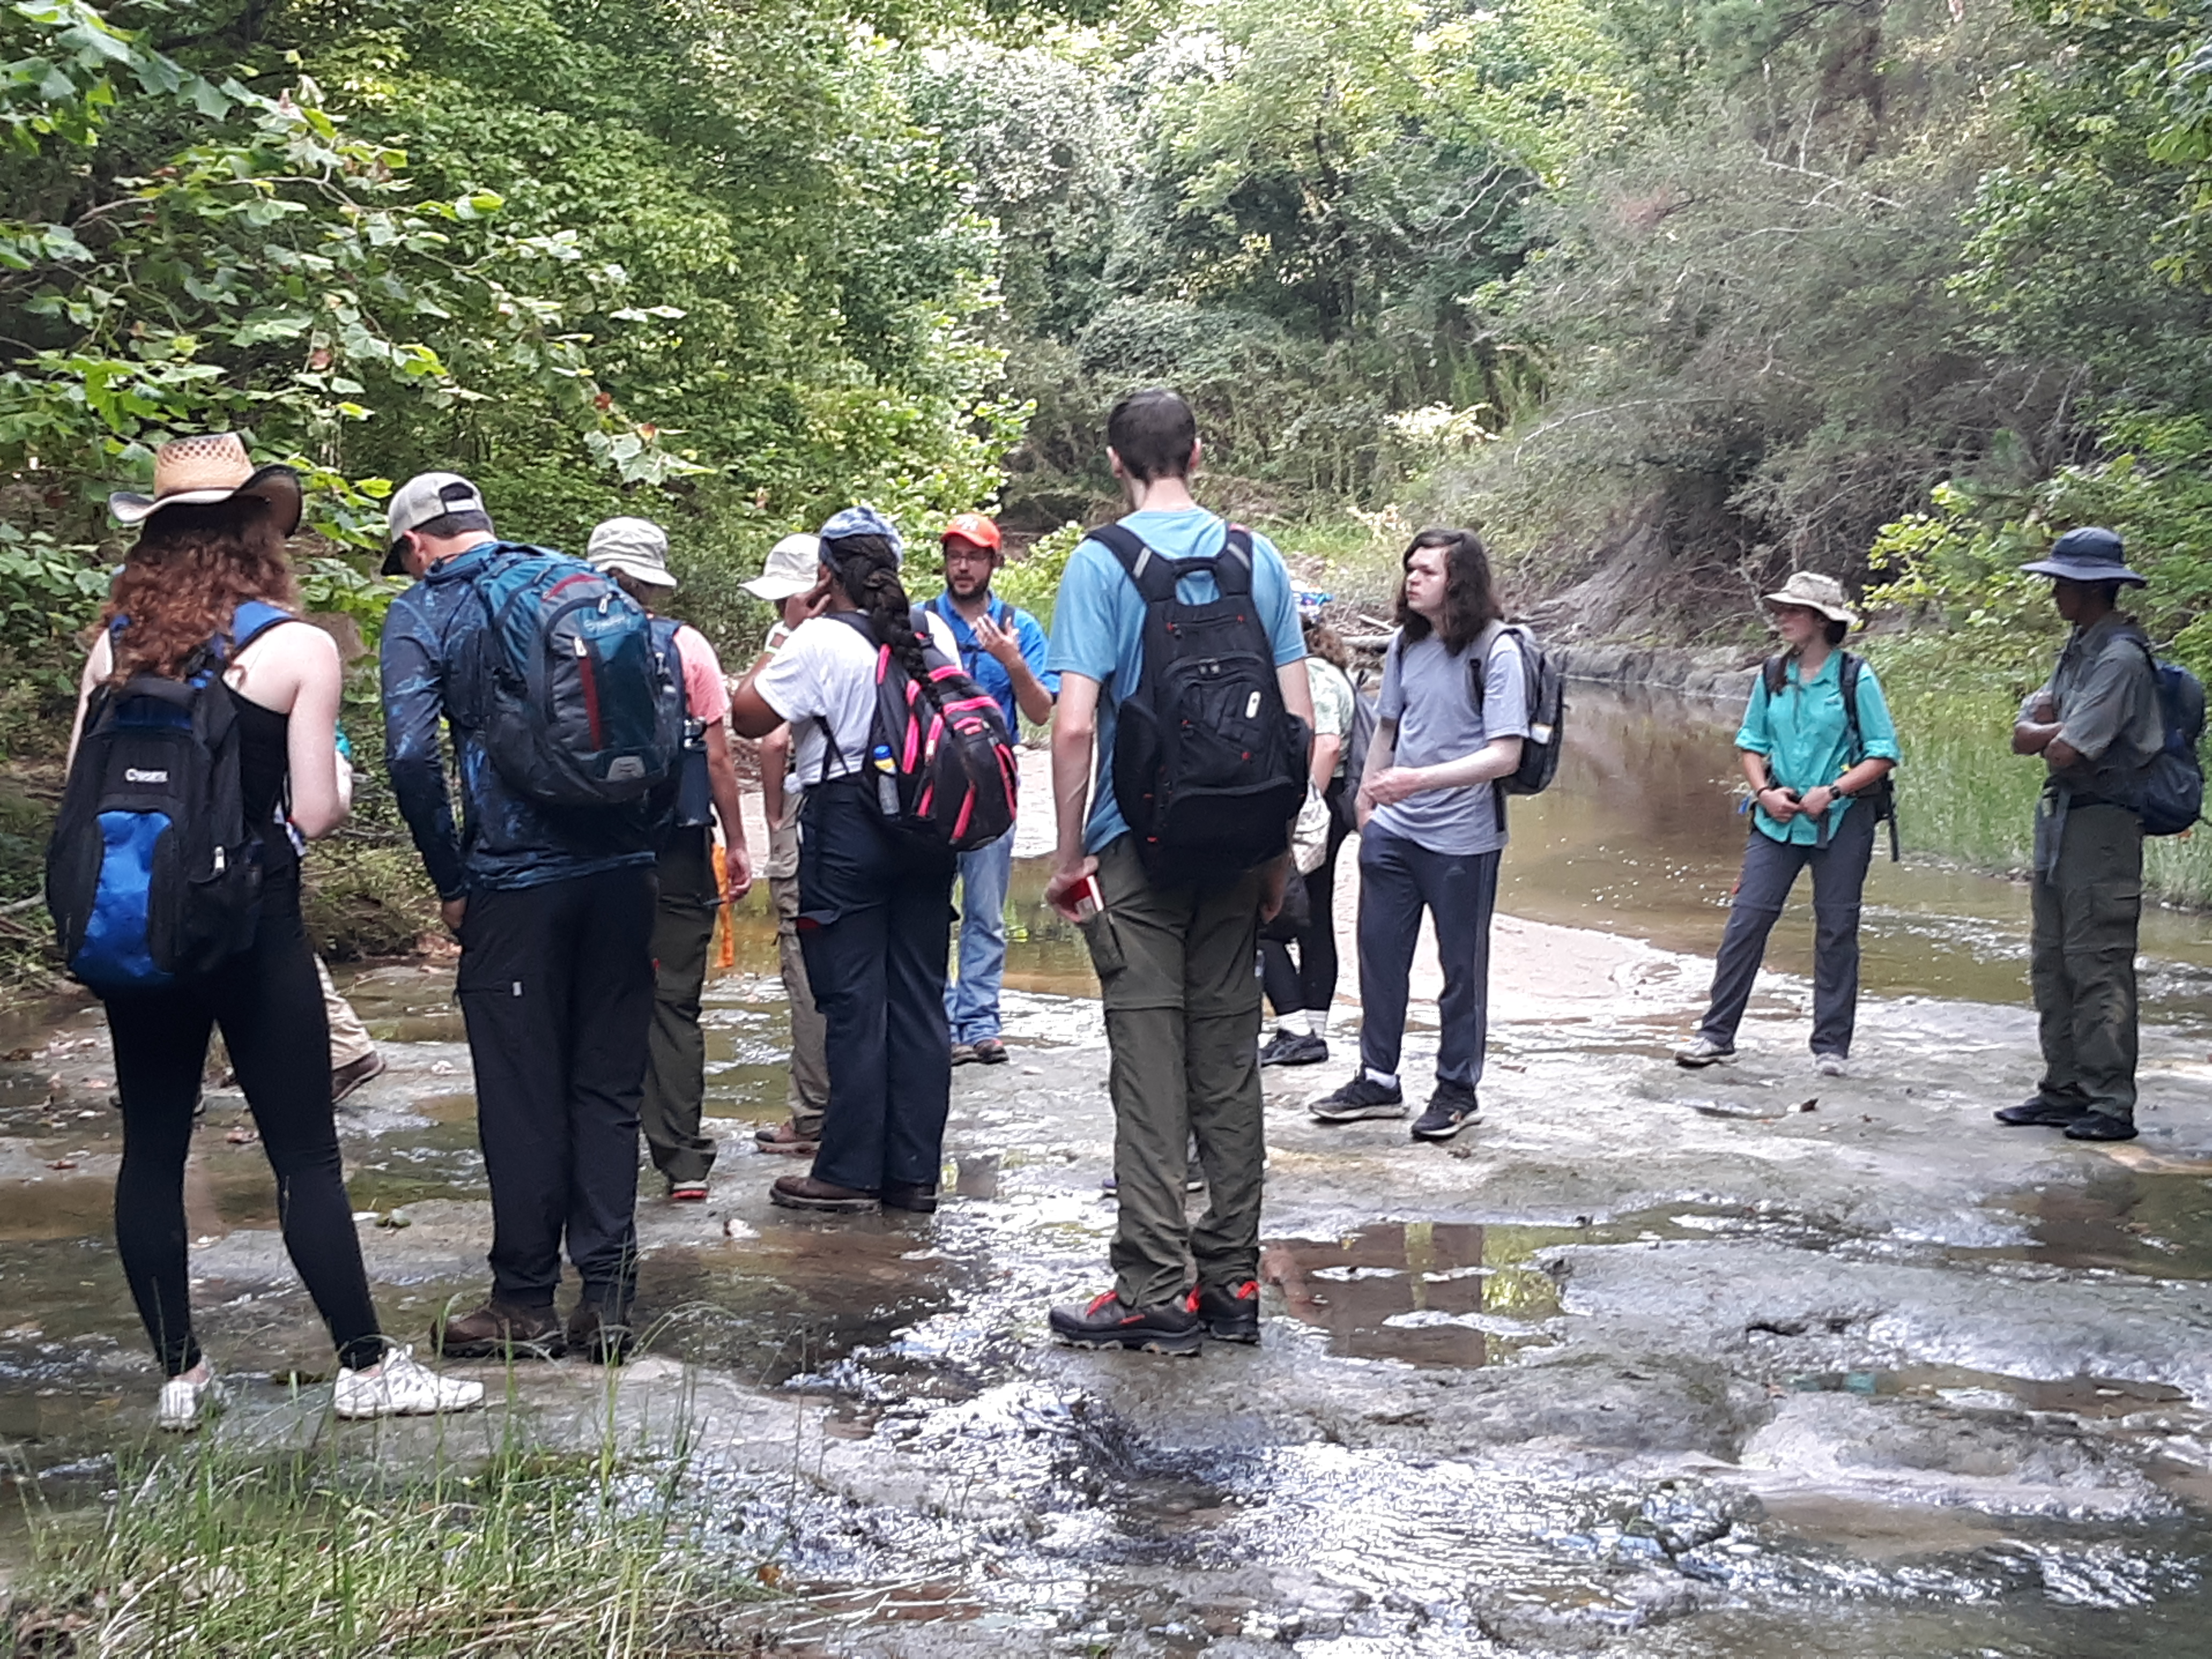 Dr. Guida (background) discussing stream processes with students